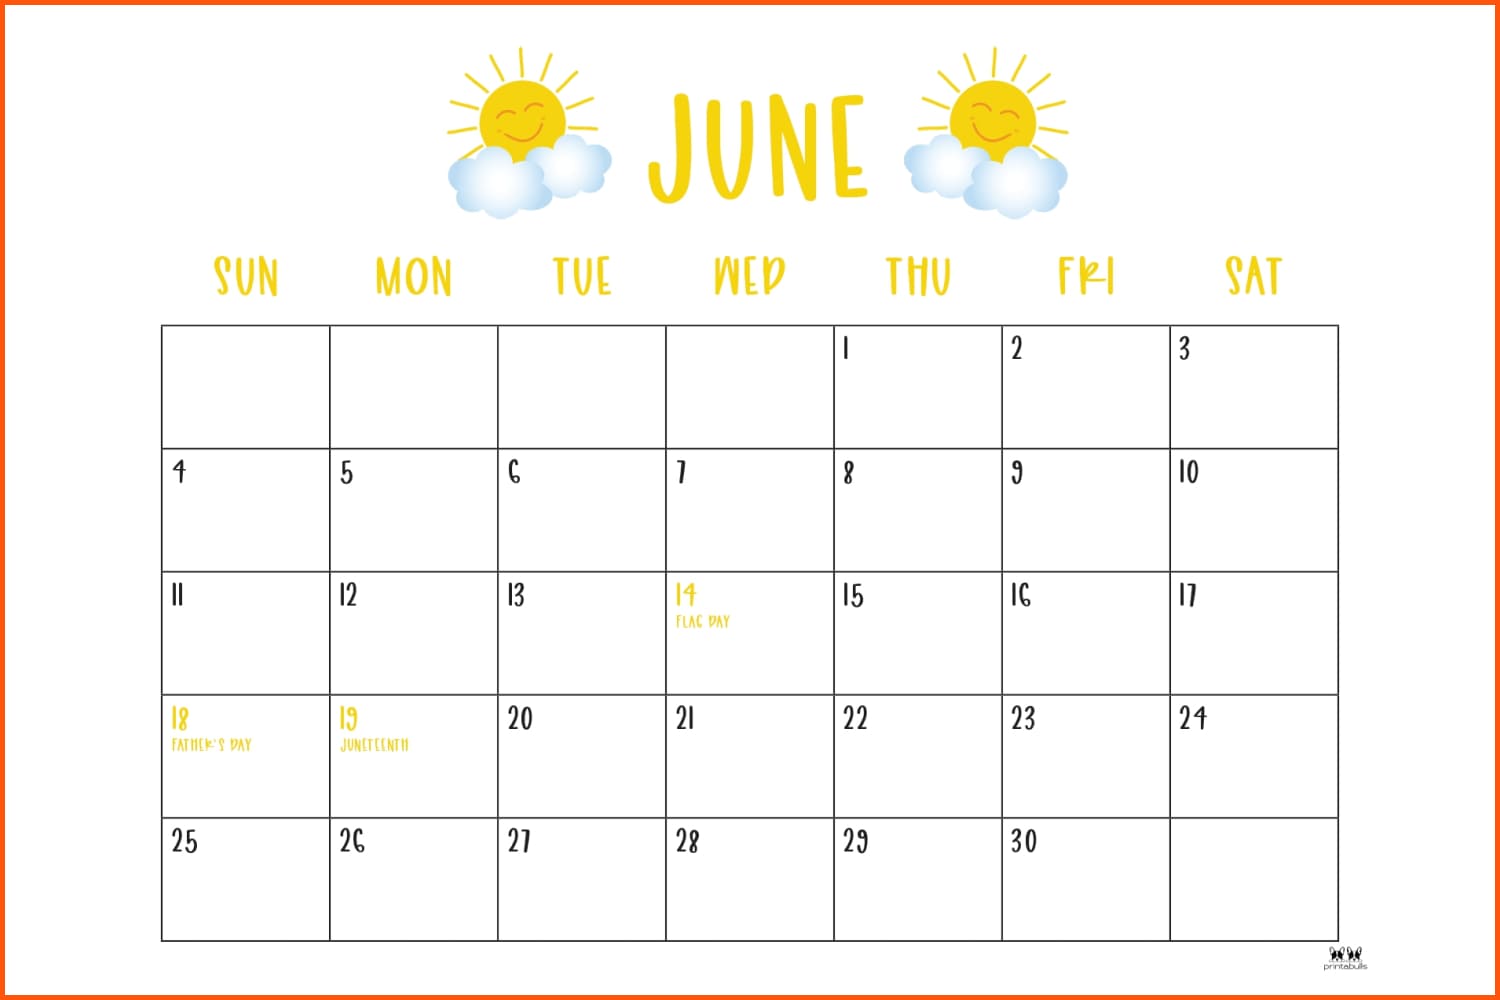 June calendar with a pattern of two suns on the clouds.